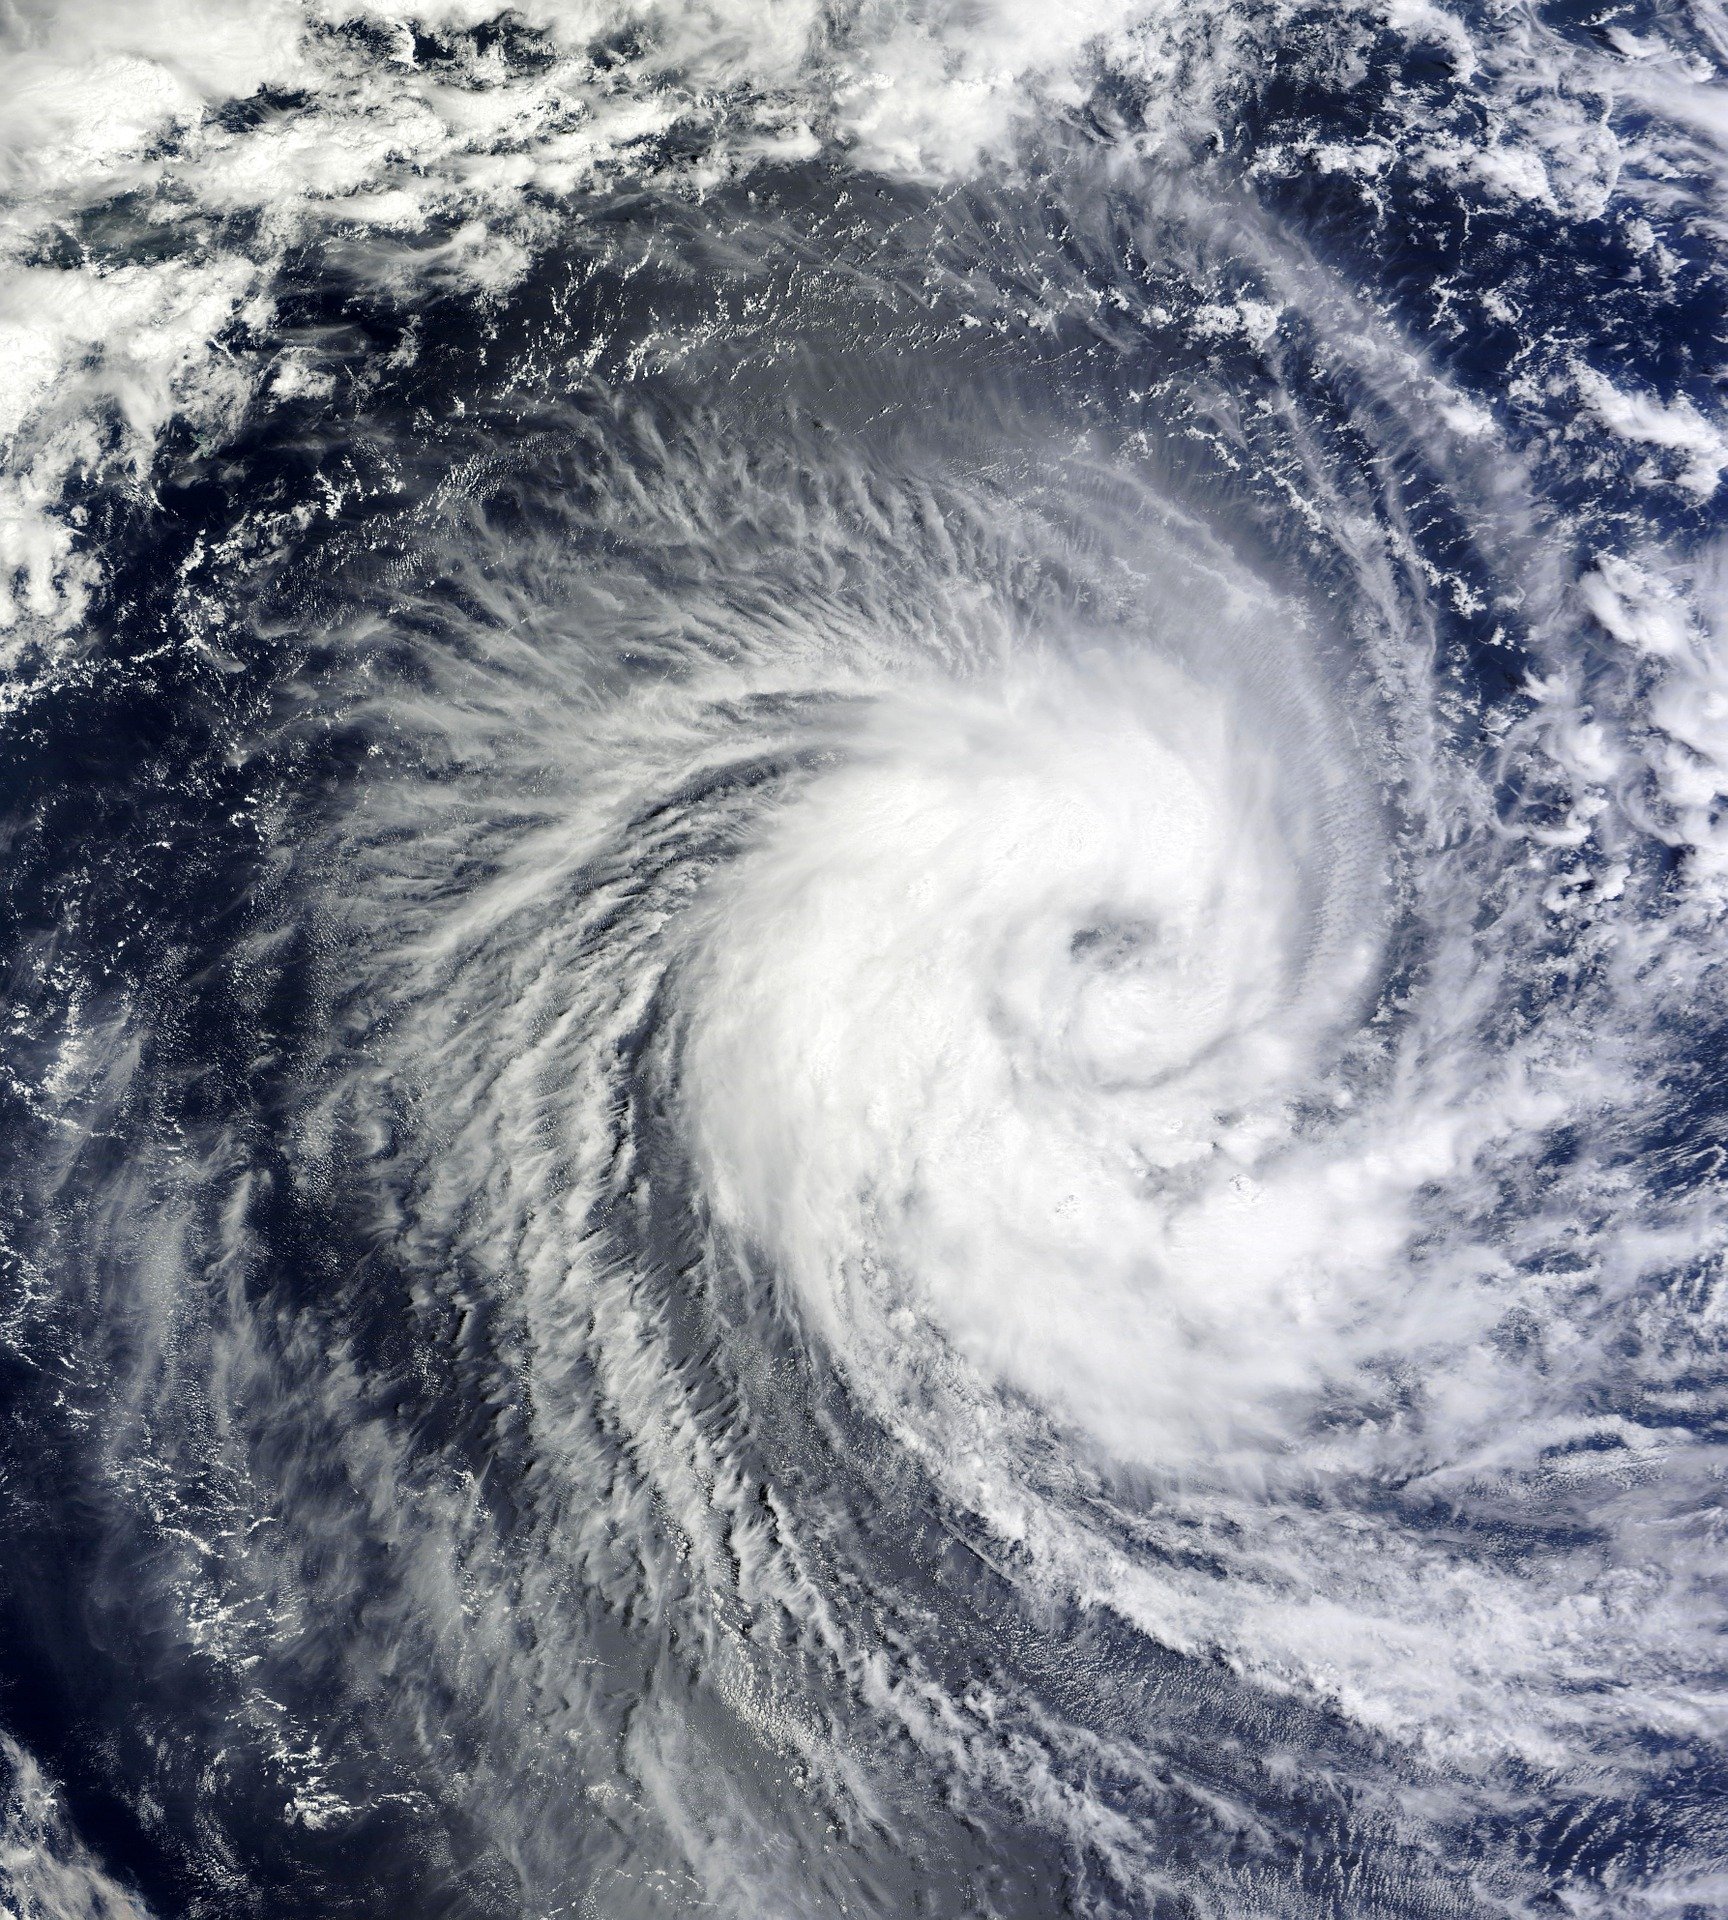 Pictured - A photograph of a typhoon | Source: Pixabay 